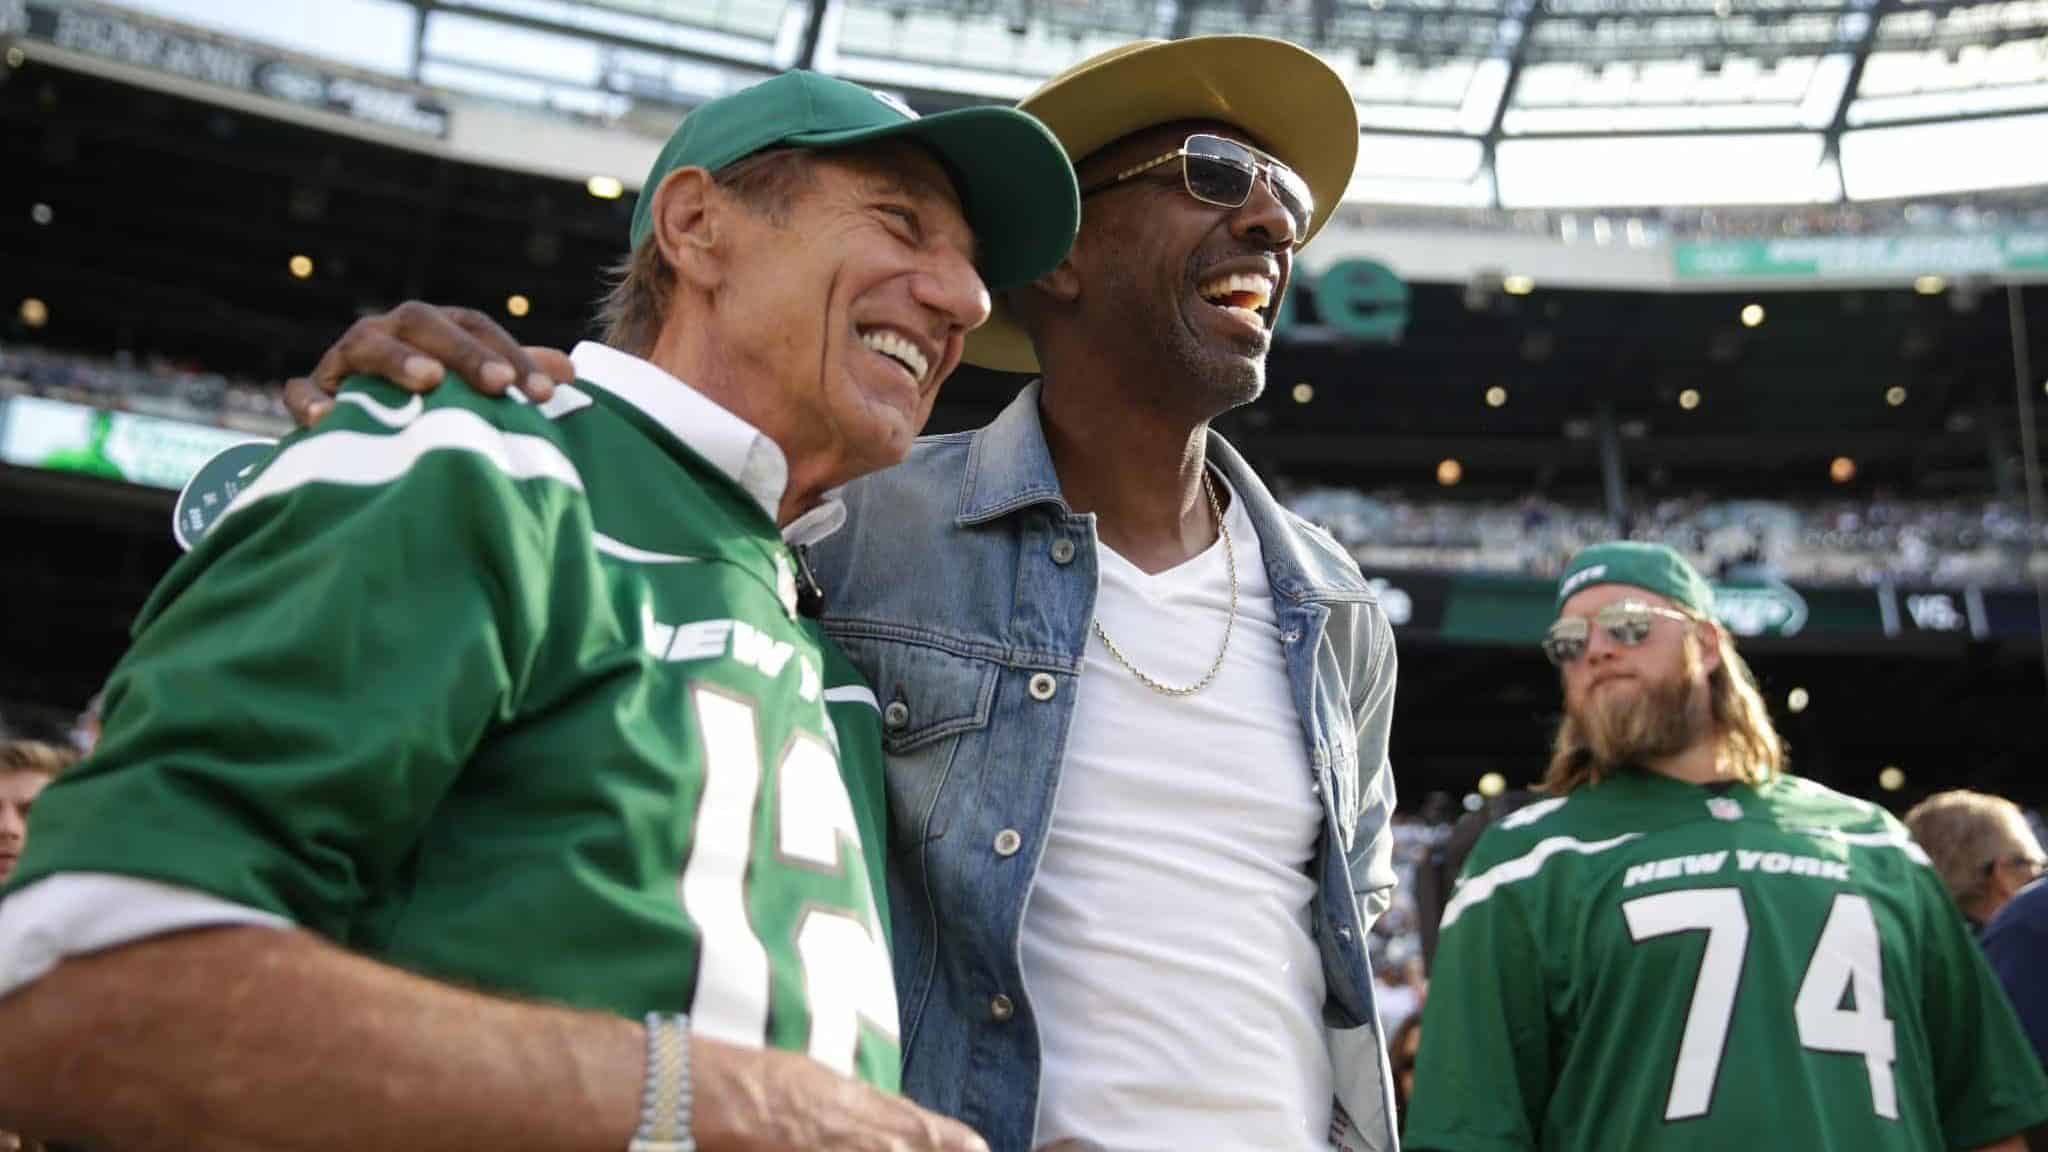 EAST RUTHERFORD, NEW JERSEY - OCTOBER 13: Hall of Famer Joe Namath and J. B. Smoove pose for pictures before the game between the New York Jets and the Dallas Cowboys at MetLife Stadium on October 13, 2019 in East Rutherford, New Jersey.